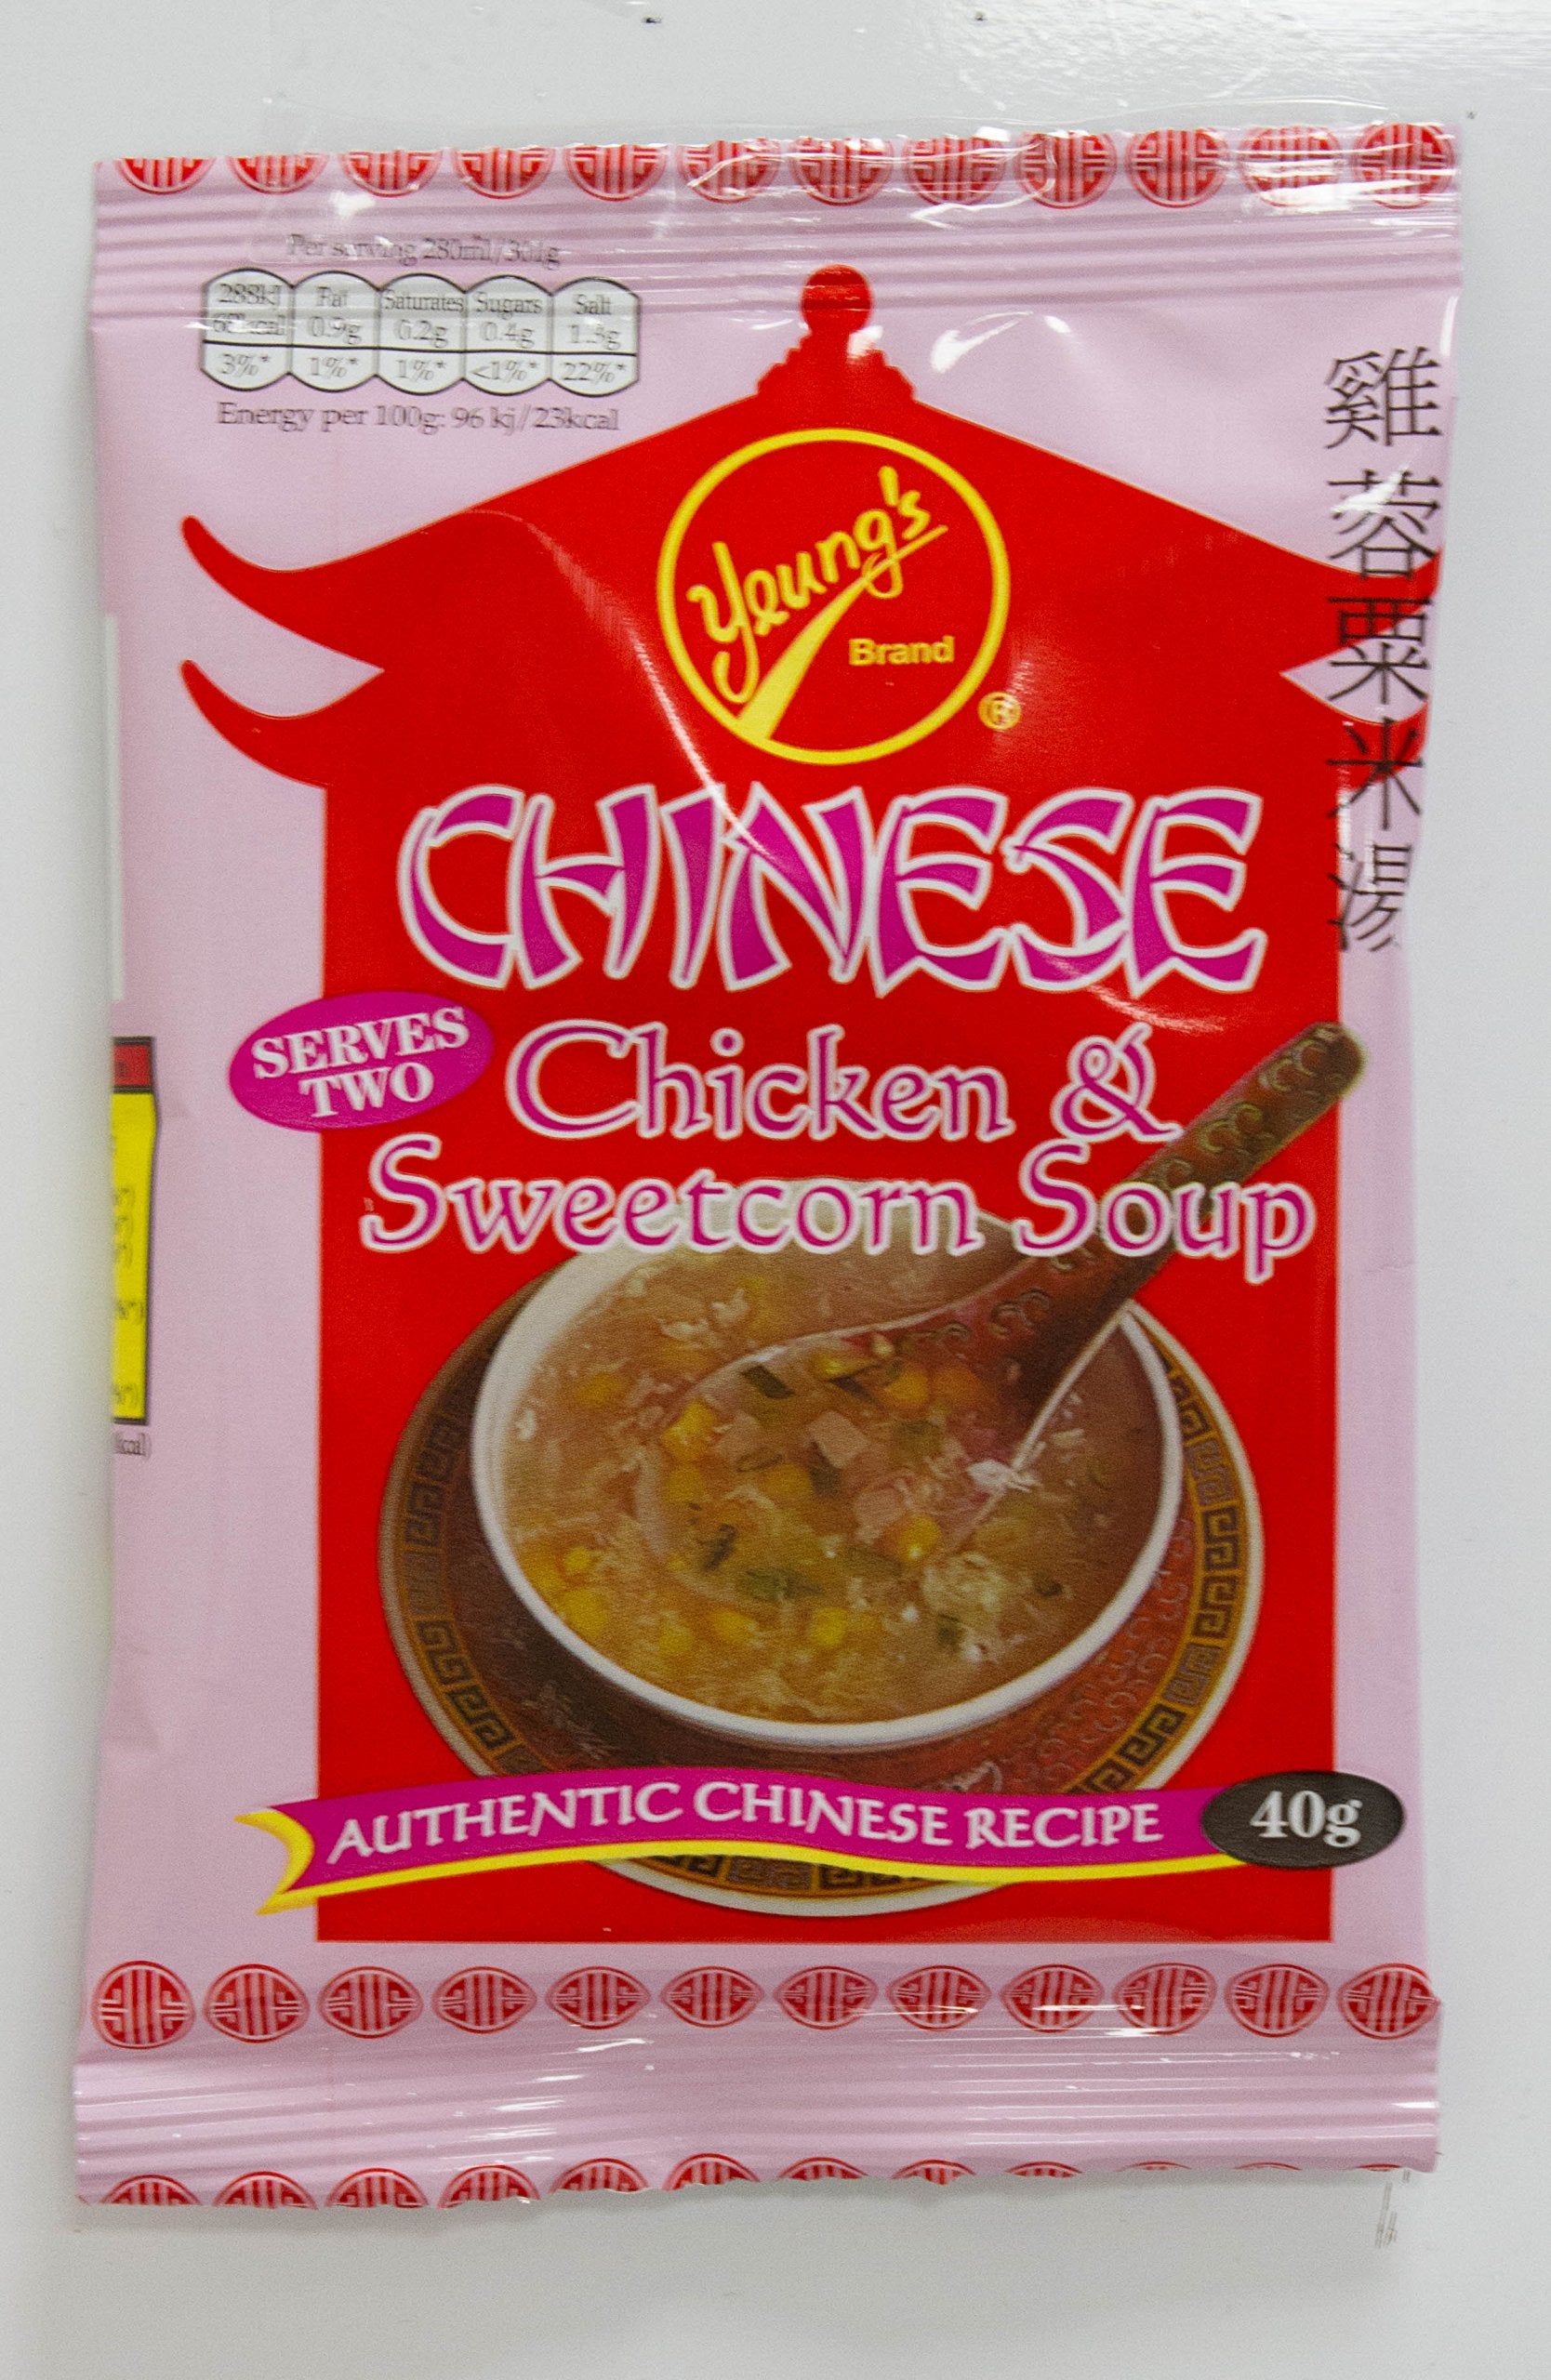 YEUNGS Chinese Chicken & Sweetcorn Soup 40g